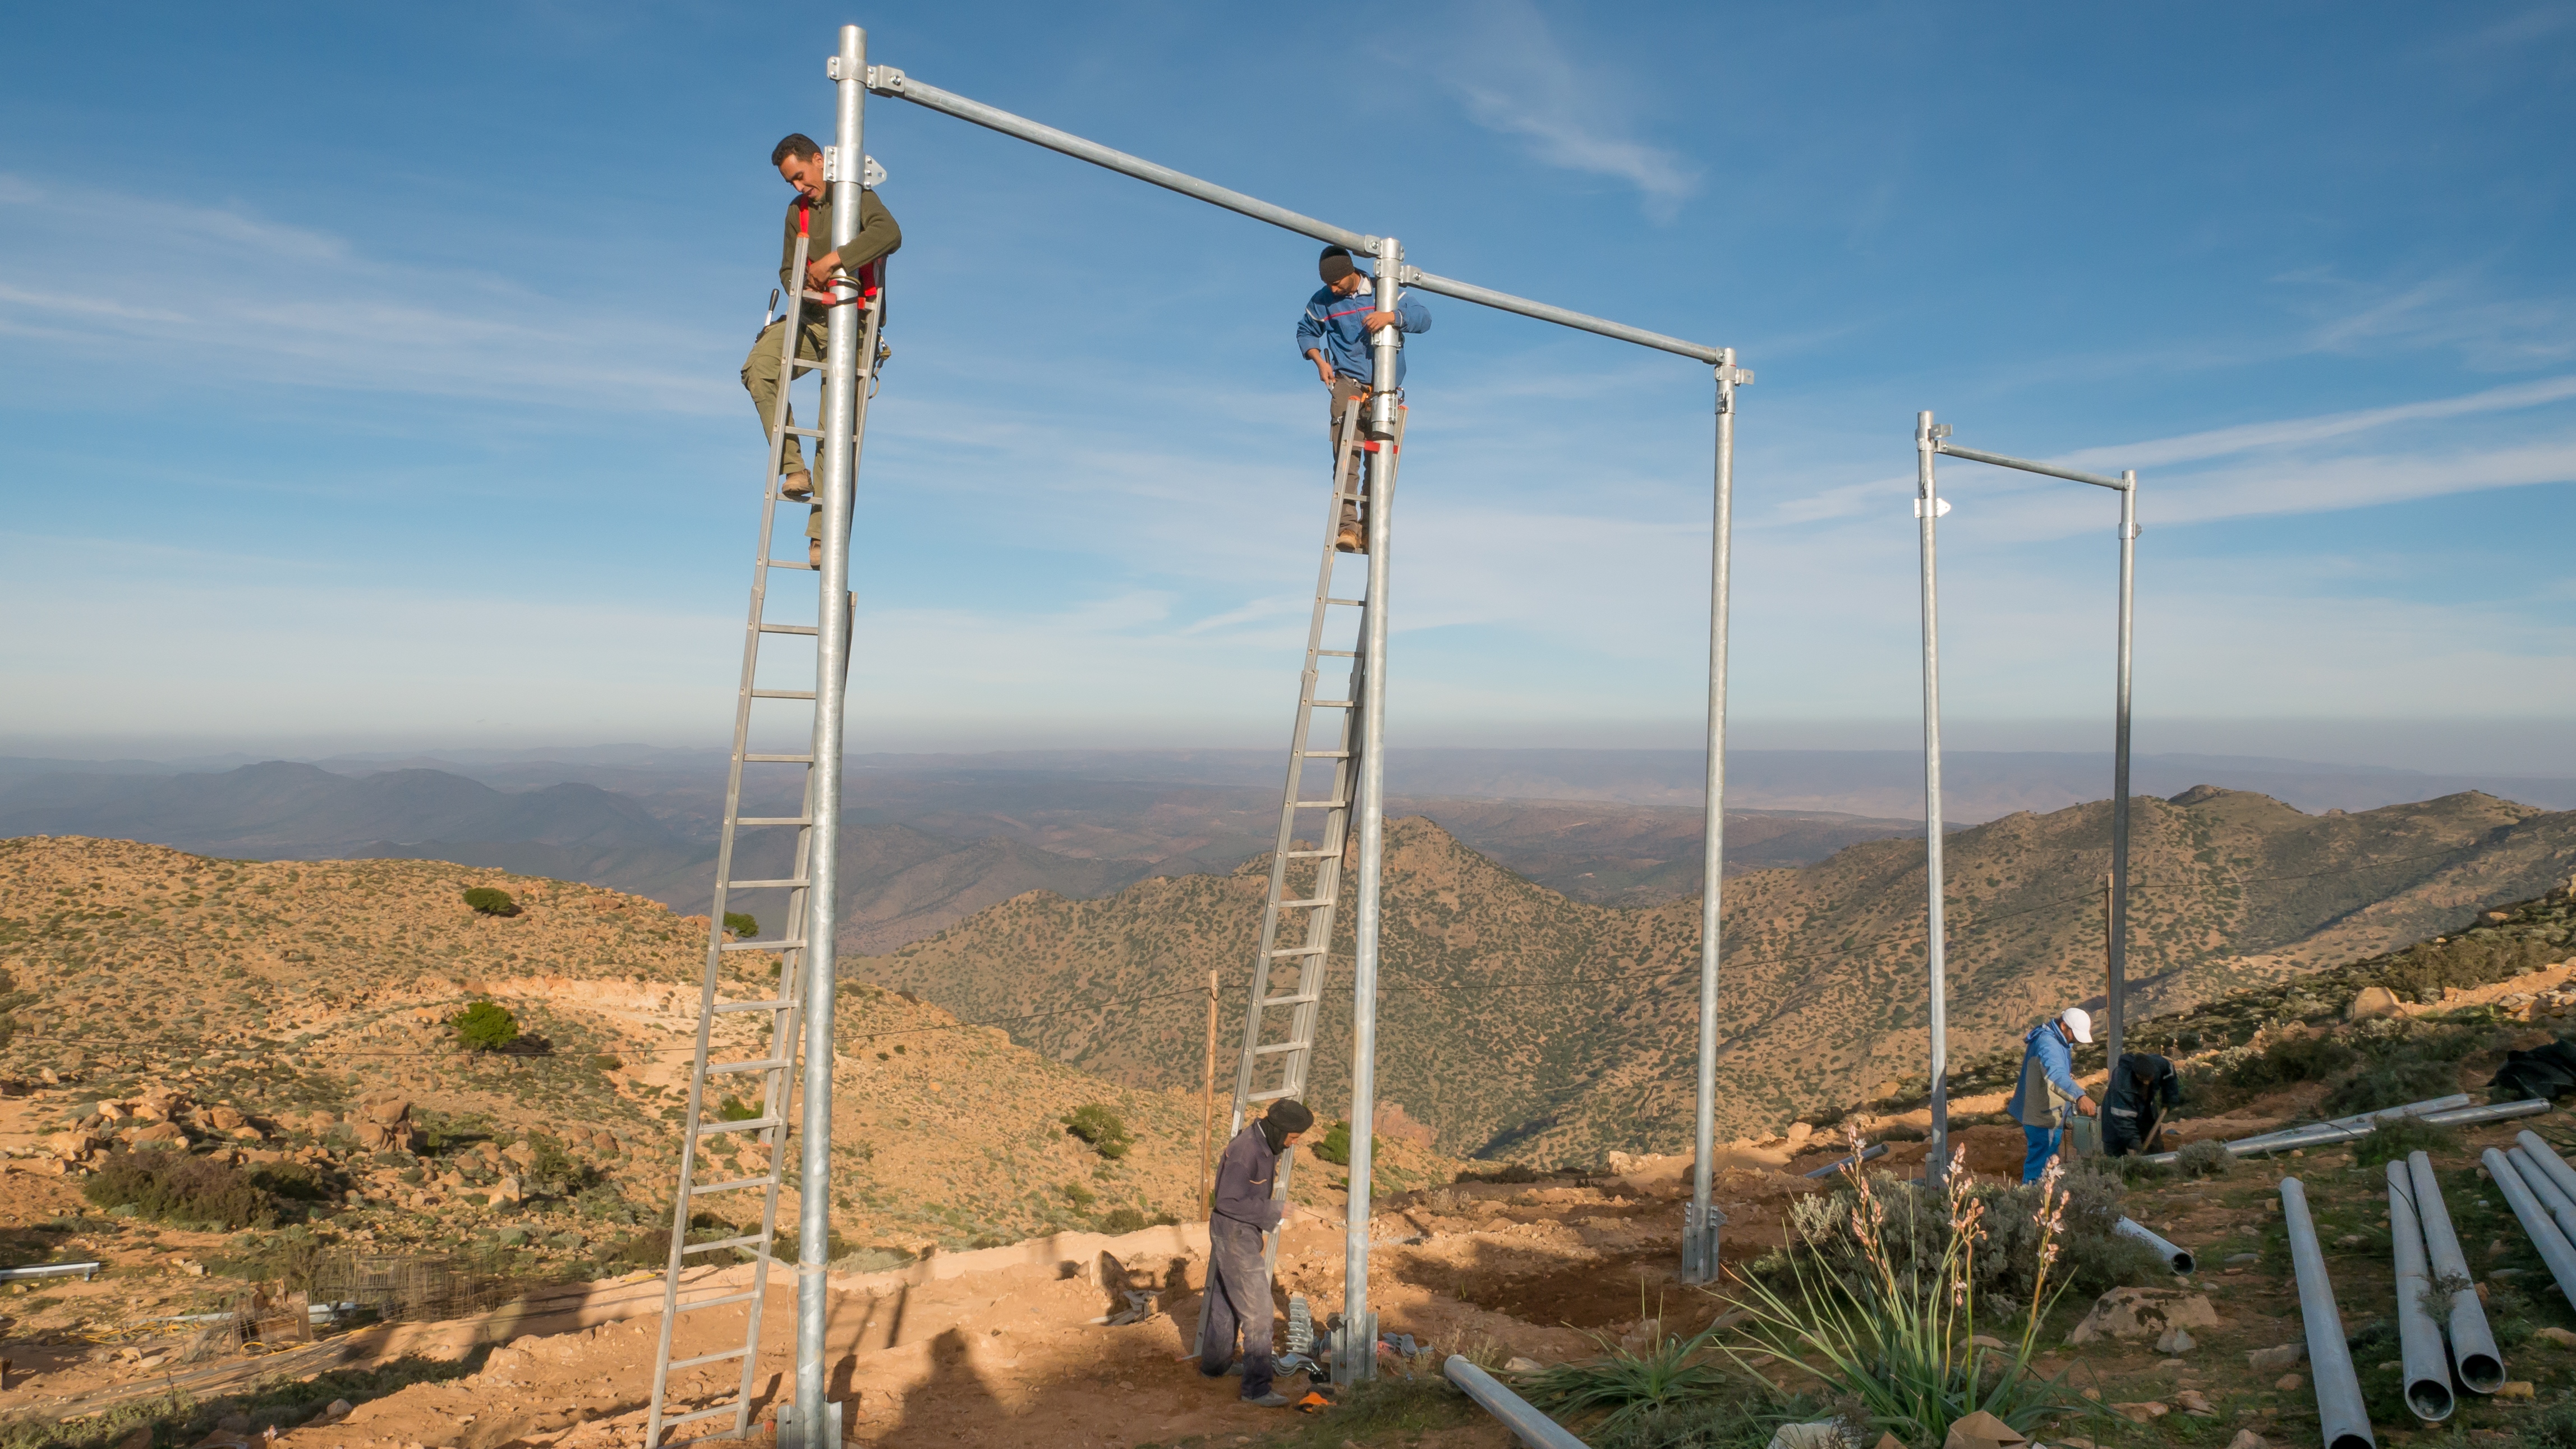 9/17:Workers adjust the hinged clamps for the bracing at a height of six metres. The four CloudFisher nets have a total surface area of 54.24 square meters. On average, they produce 22 litres per square metre of drinking water. 